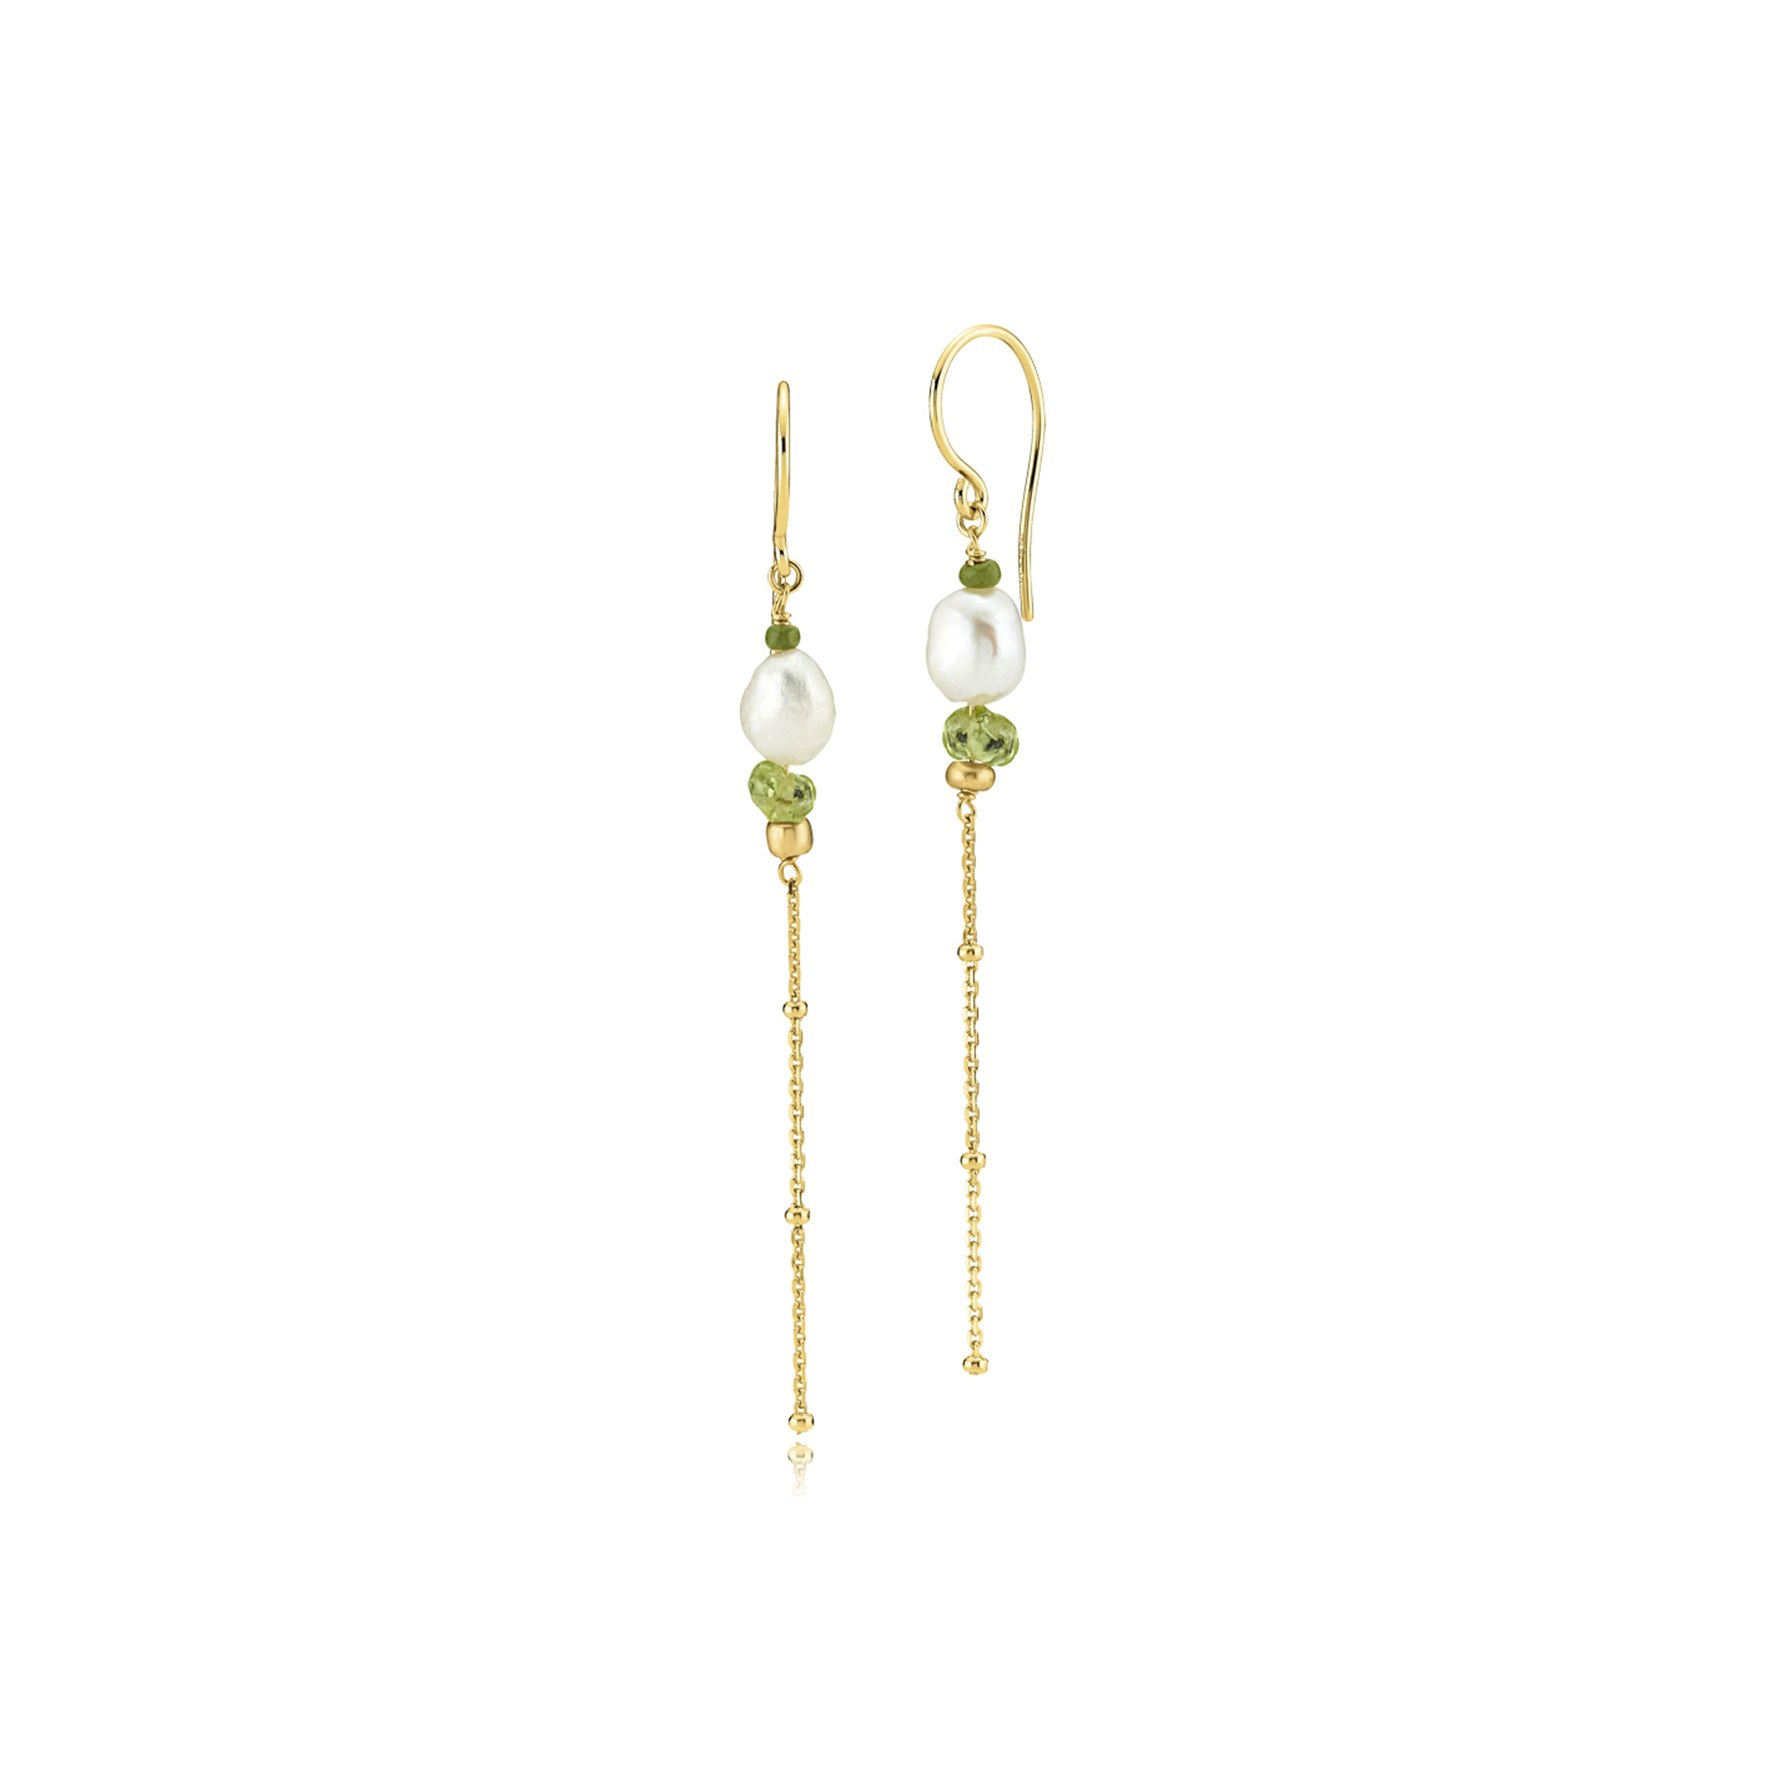 Beach Earrings Green With Pearl from Sistie in Goldplated Silver Sterling 925